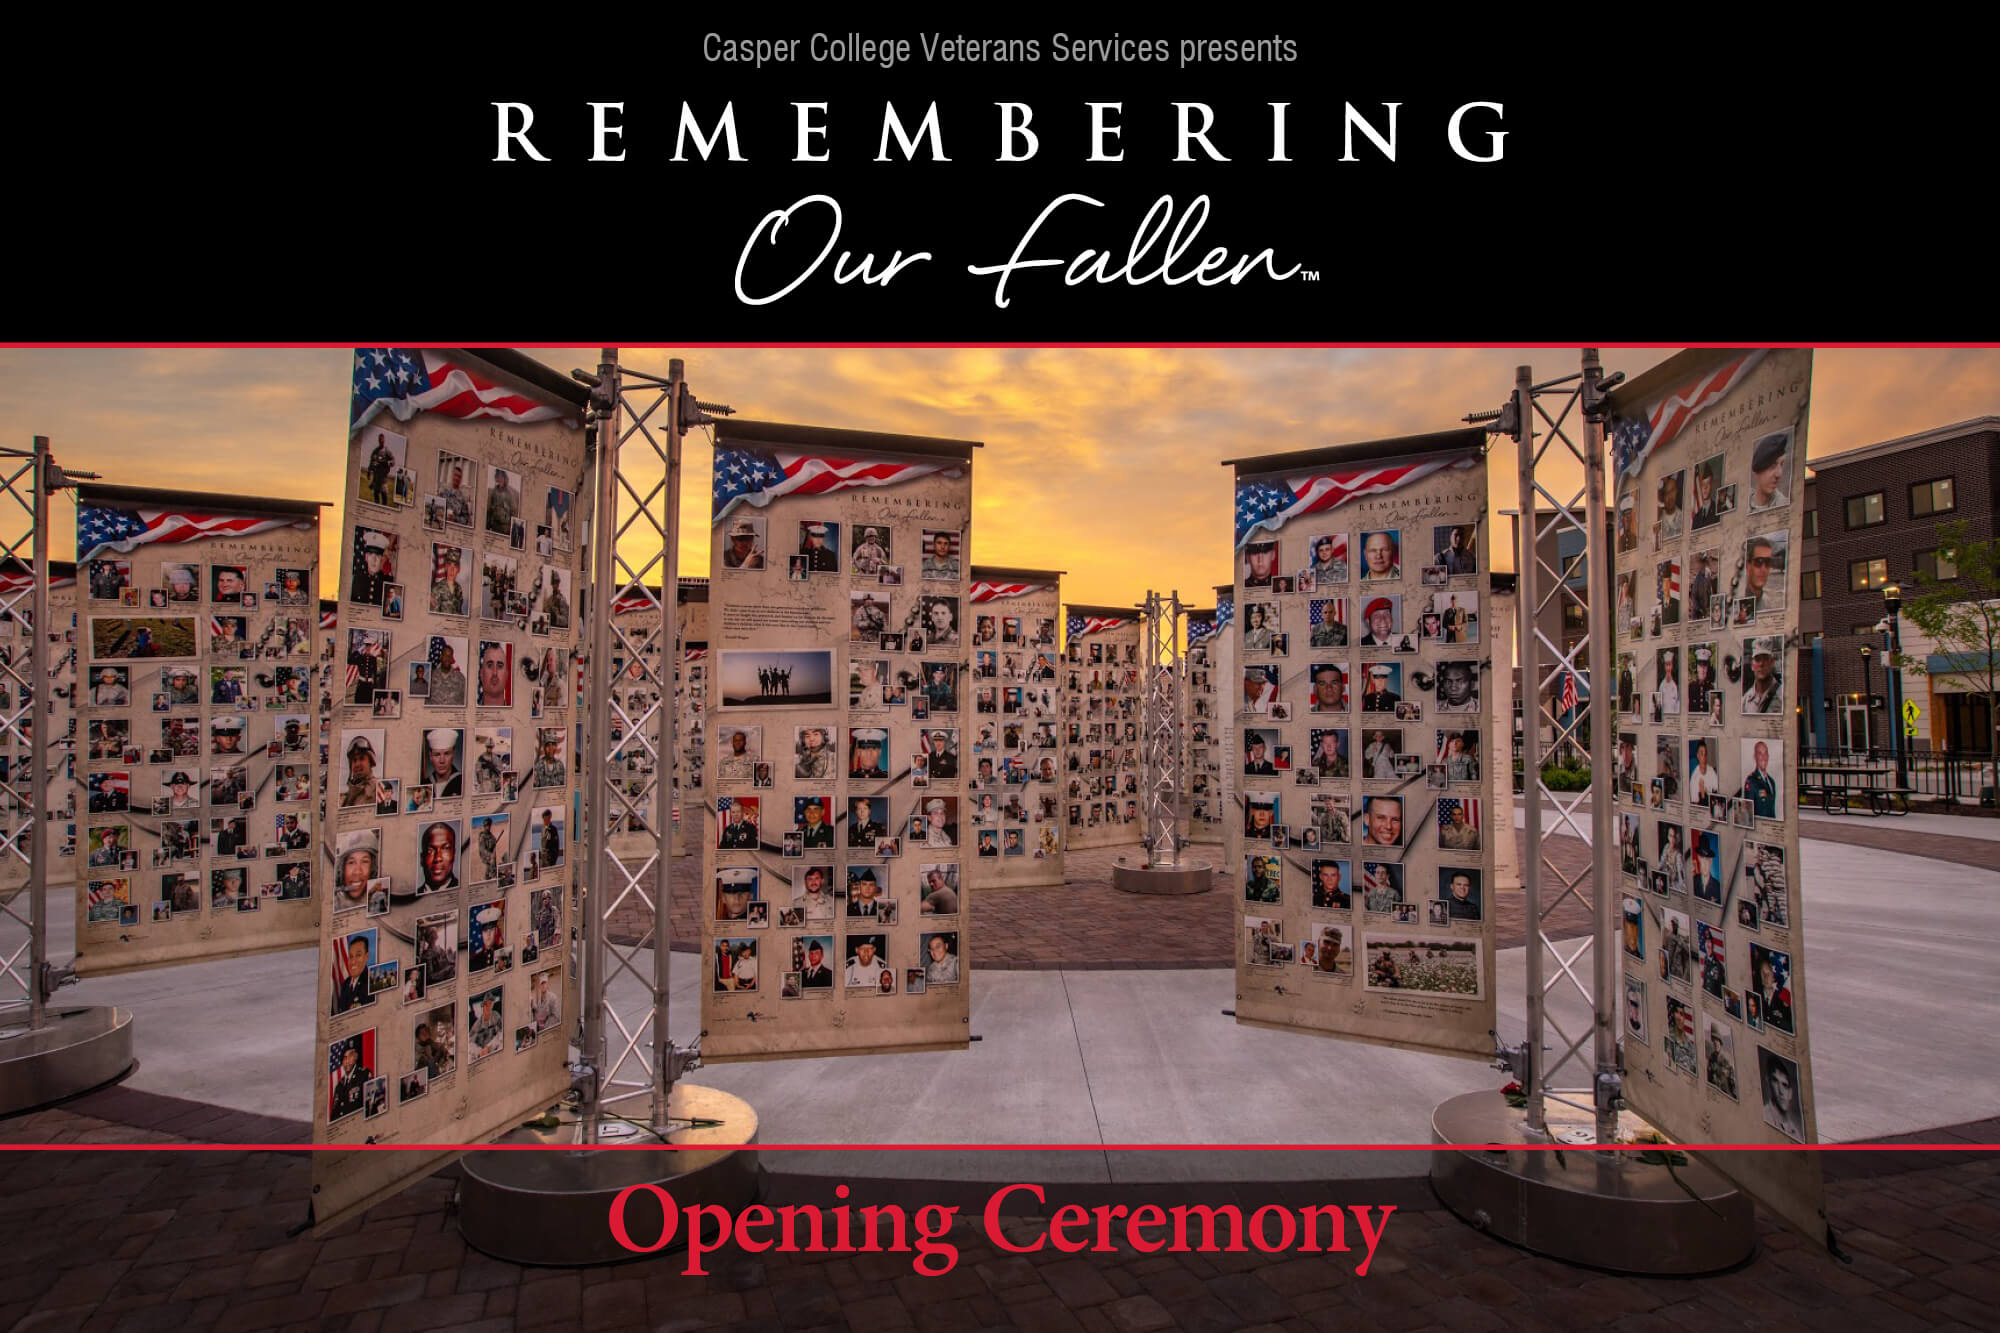 Image for the opening ceremony for the "National Remember Our Fallen Memorial."